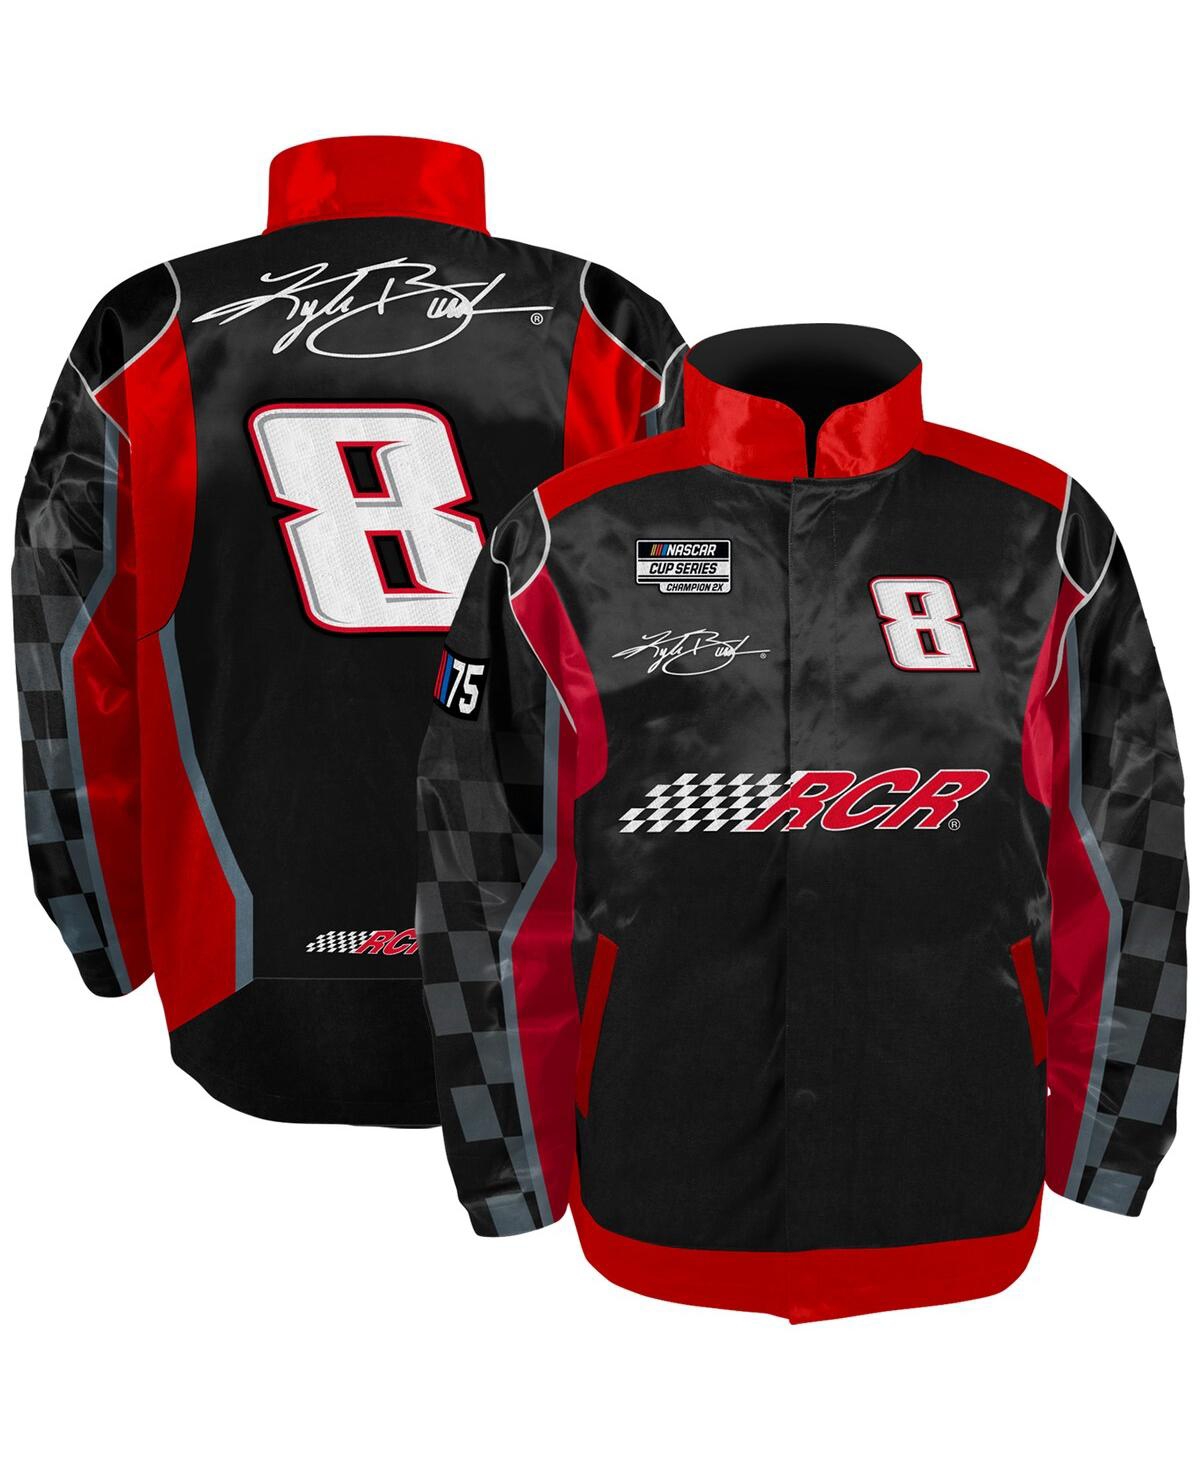 Richard Childress Racing Team Collection Men's  Black, Red Kyle Busch Nylon Uniform Full-snap Jacket In Black,red